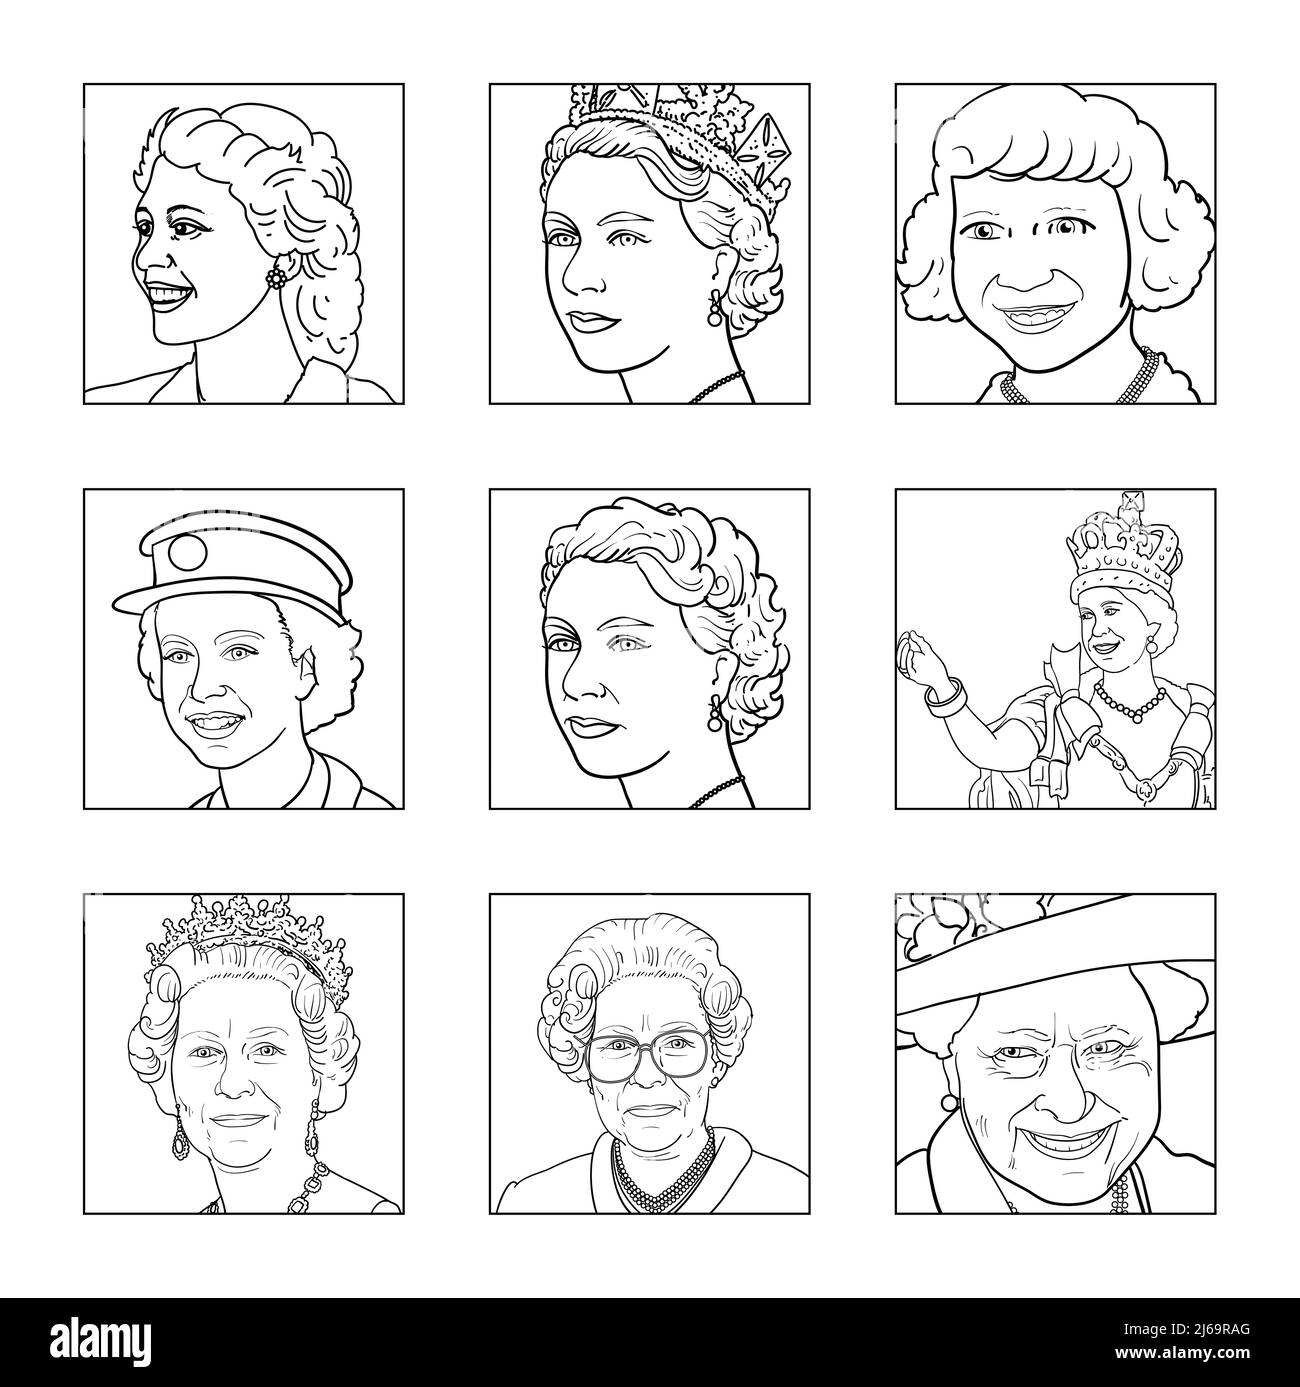 Black & white line drawingfor colouring in, educational worksheets, children's play Platinum Jubilee photocopiable Queen Elizabeth II through the ages Stock Photo